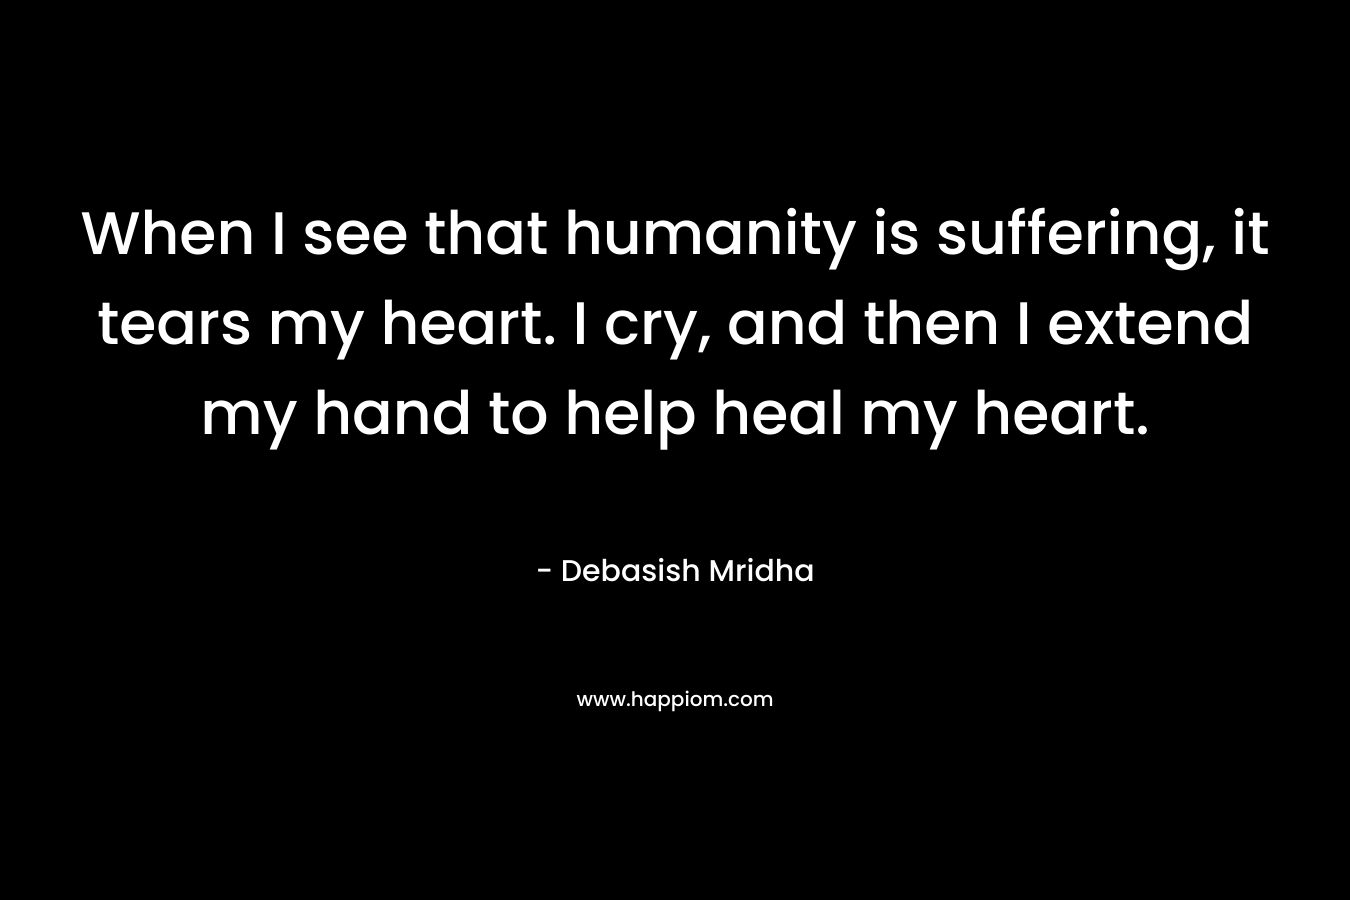 When I see that humanity is suffering, it tears my heart. I cry, and then I extend my hand to help heal my heart.